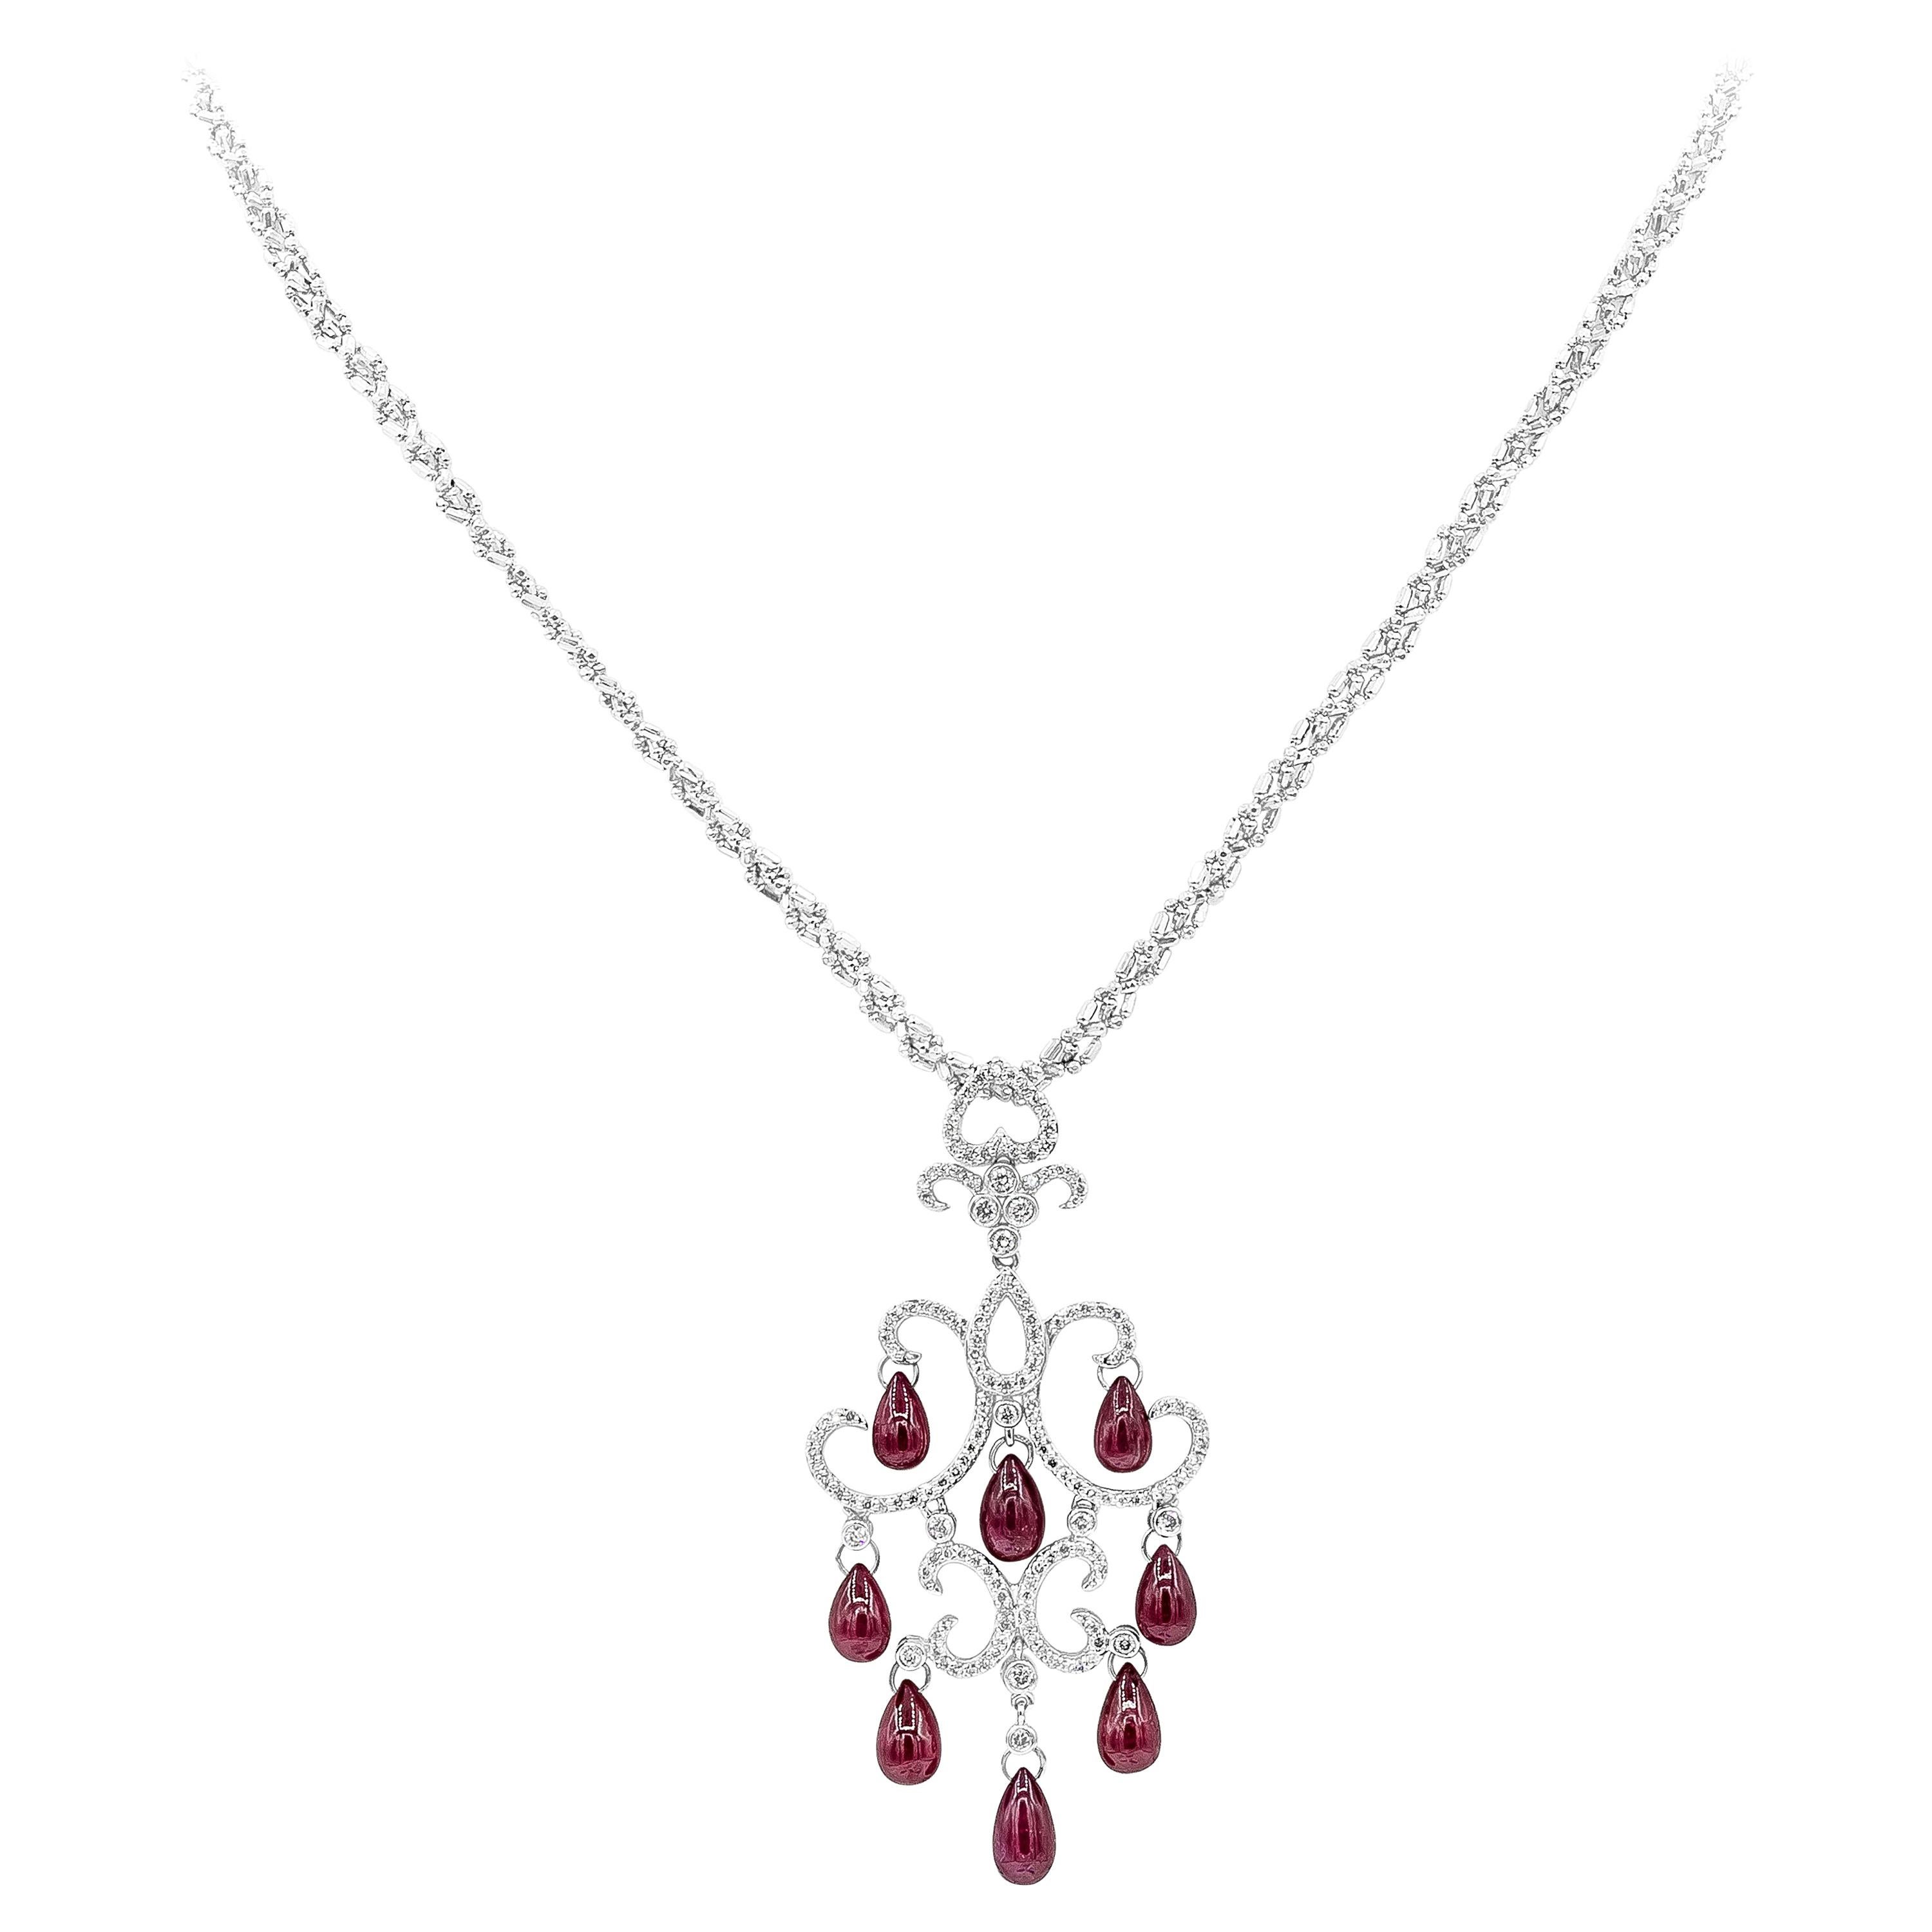 16.25 Carats Briolette Rubies with Round Cut Diamonds Chandelier Necklace